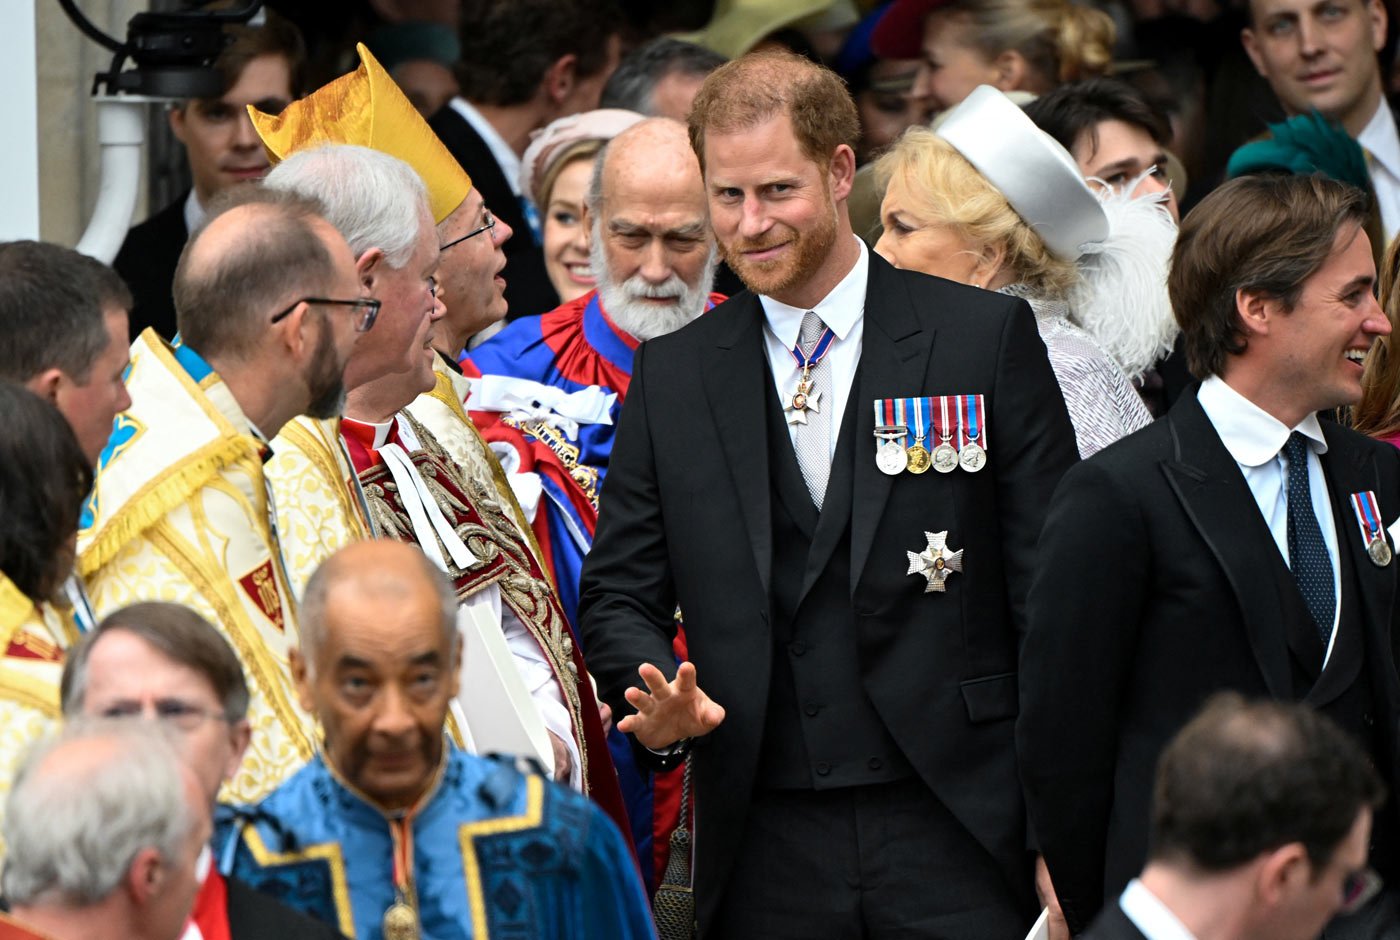 Prince Harry, Duke of Sussex, leaves Westminster Abbey following the coronation ceremony